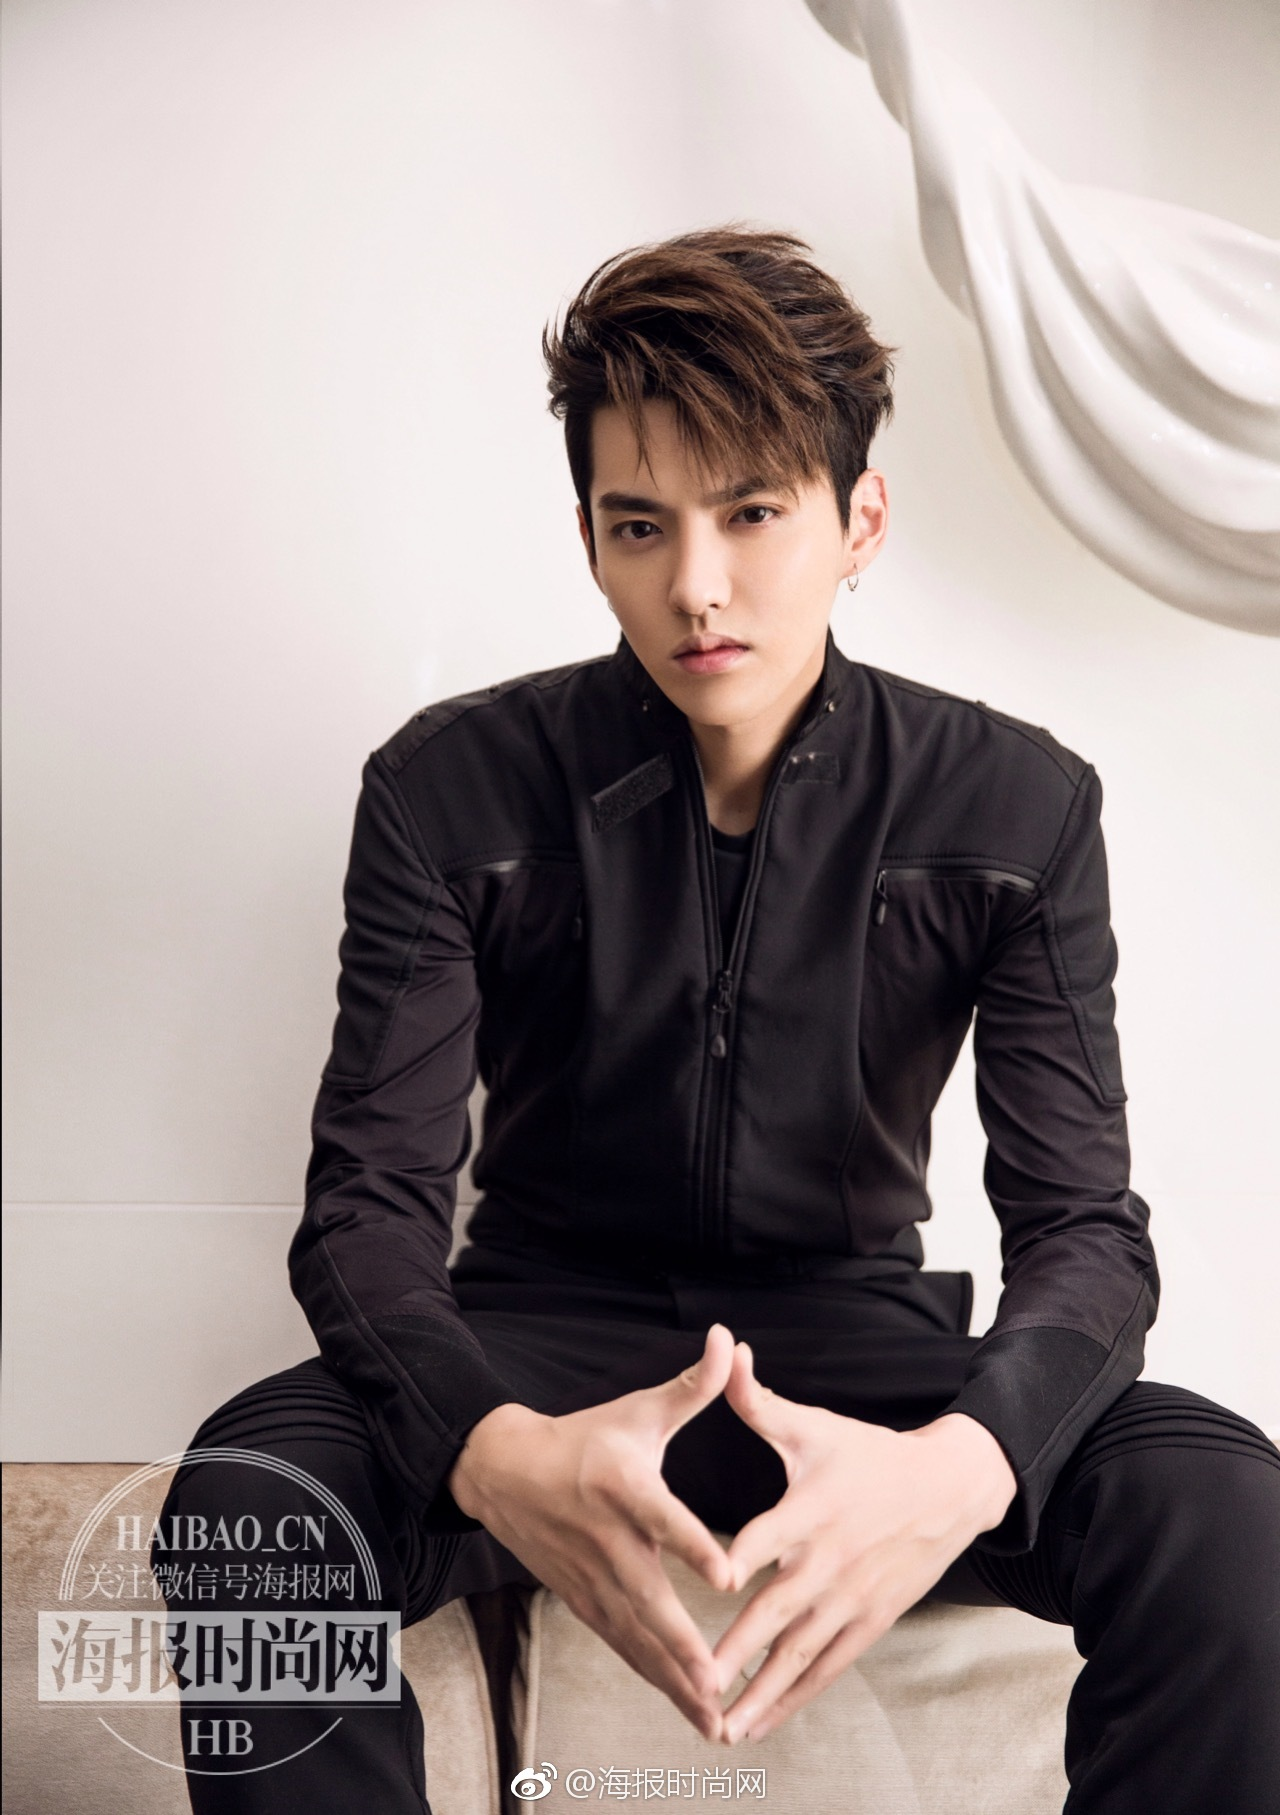 Kris Wu The Paper Interview